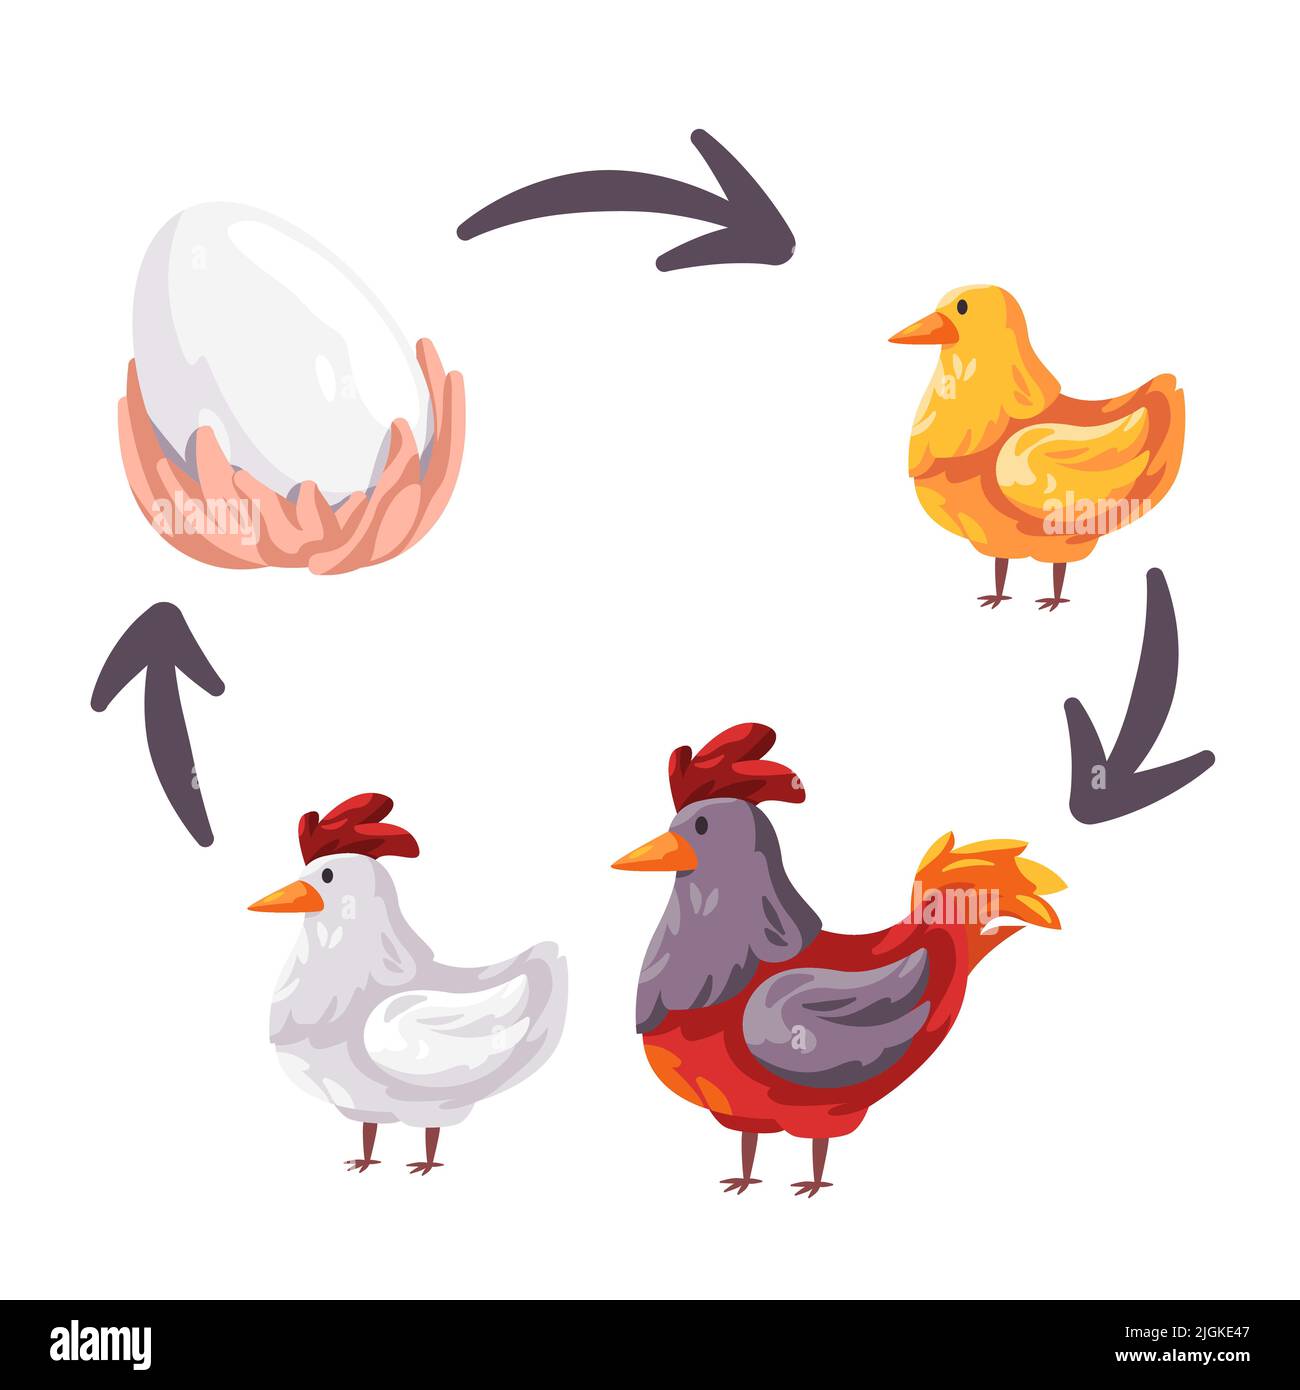 Chicken life cycle stages from egg to young and adult rooster reproduction illustration Stock Vector